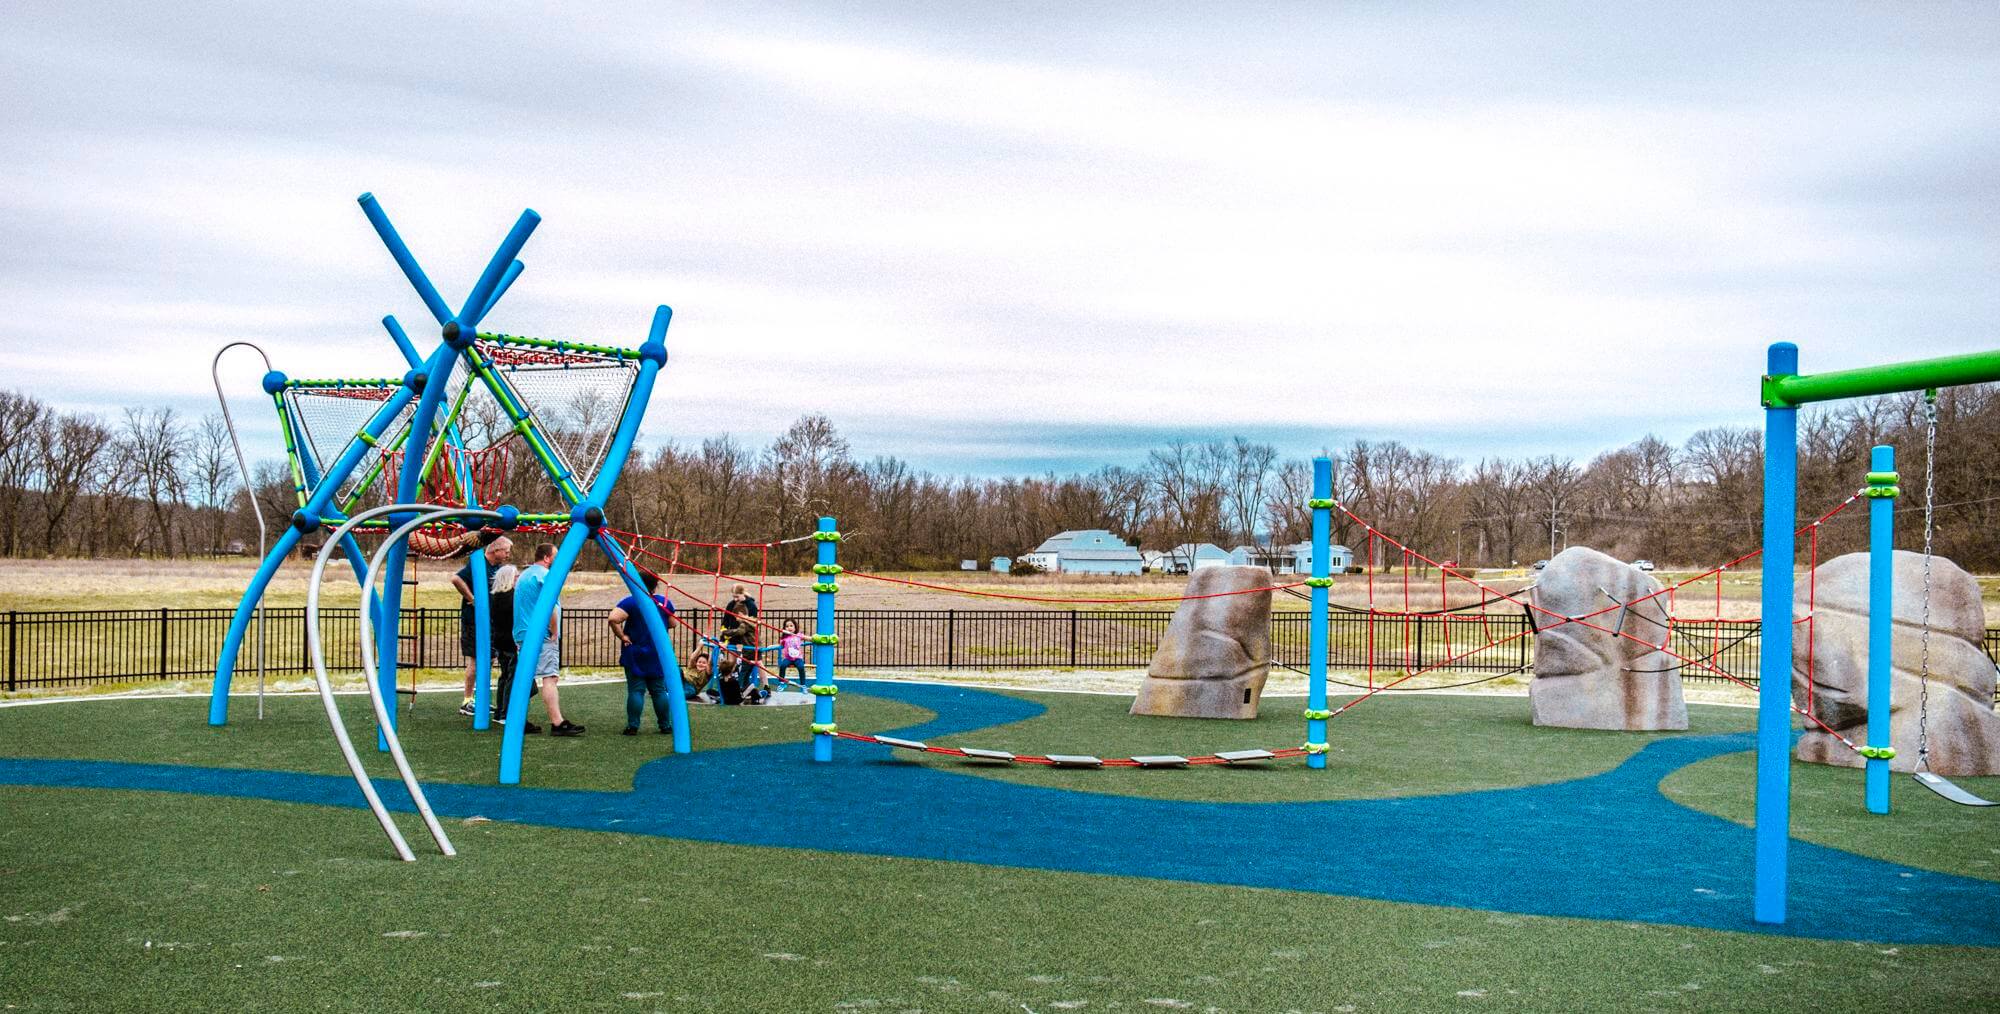 A playground landscape showing a rope bridge connecting two climbing boulders with a complex climbing structure in the background.